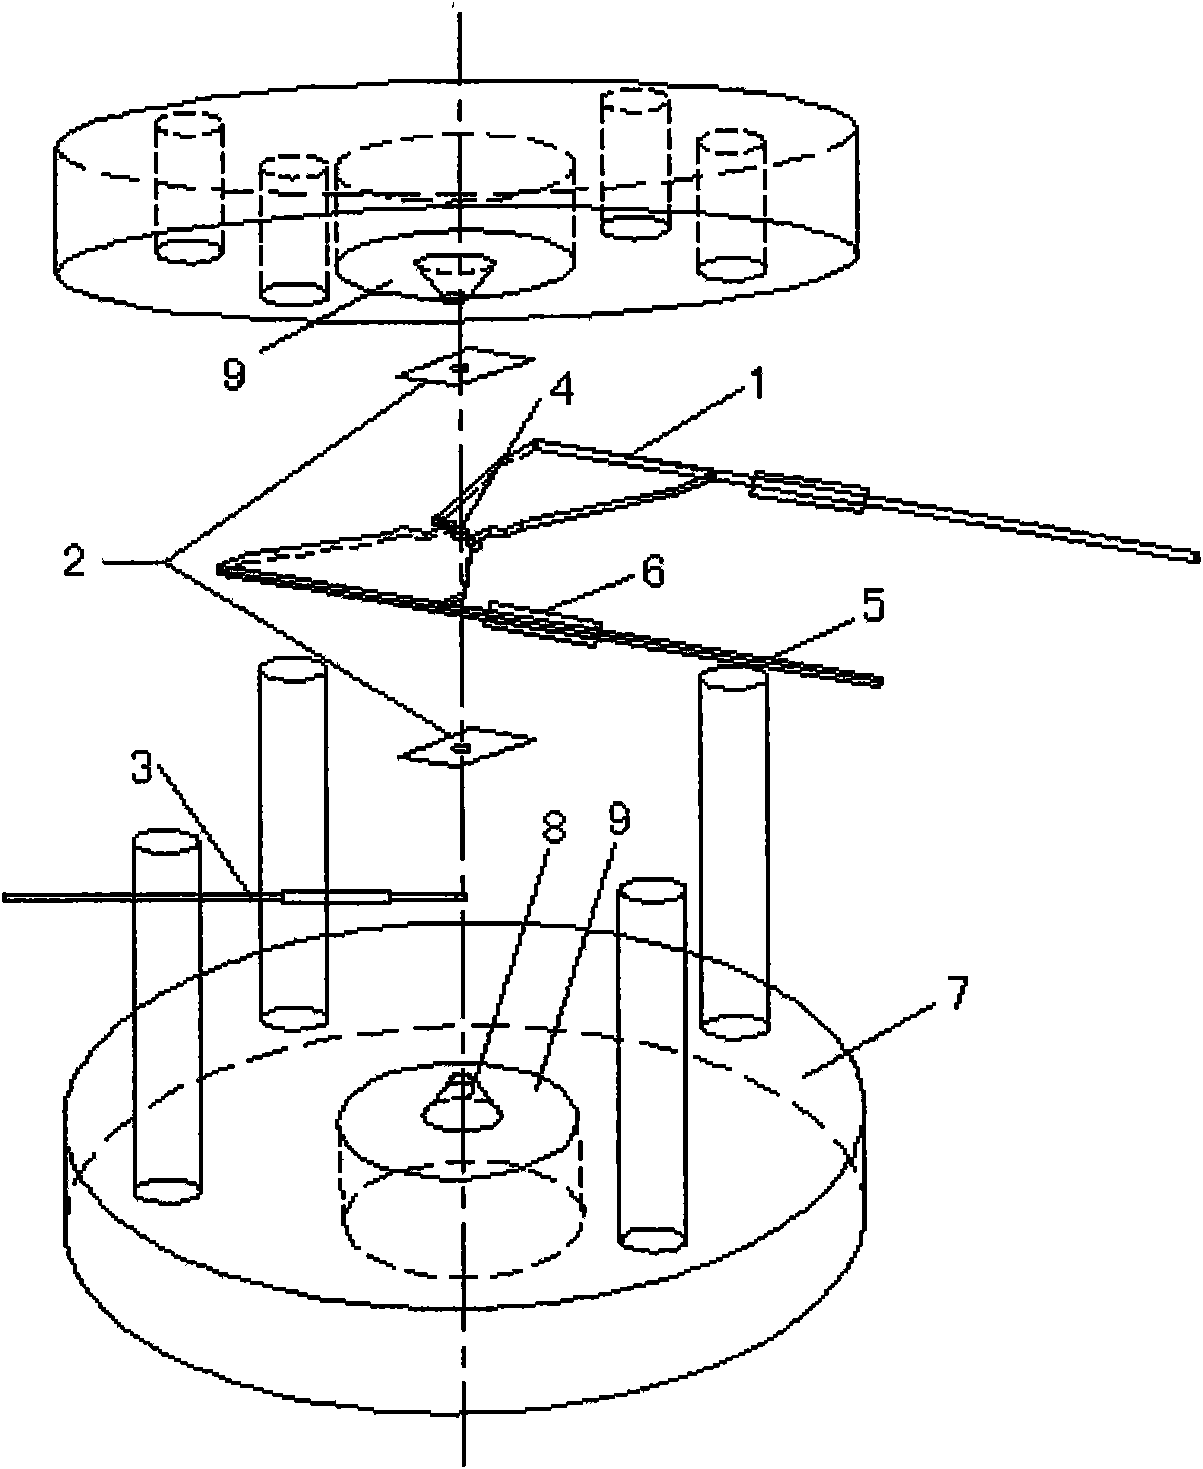 High temperature and high voltage experimental device for heating gasket